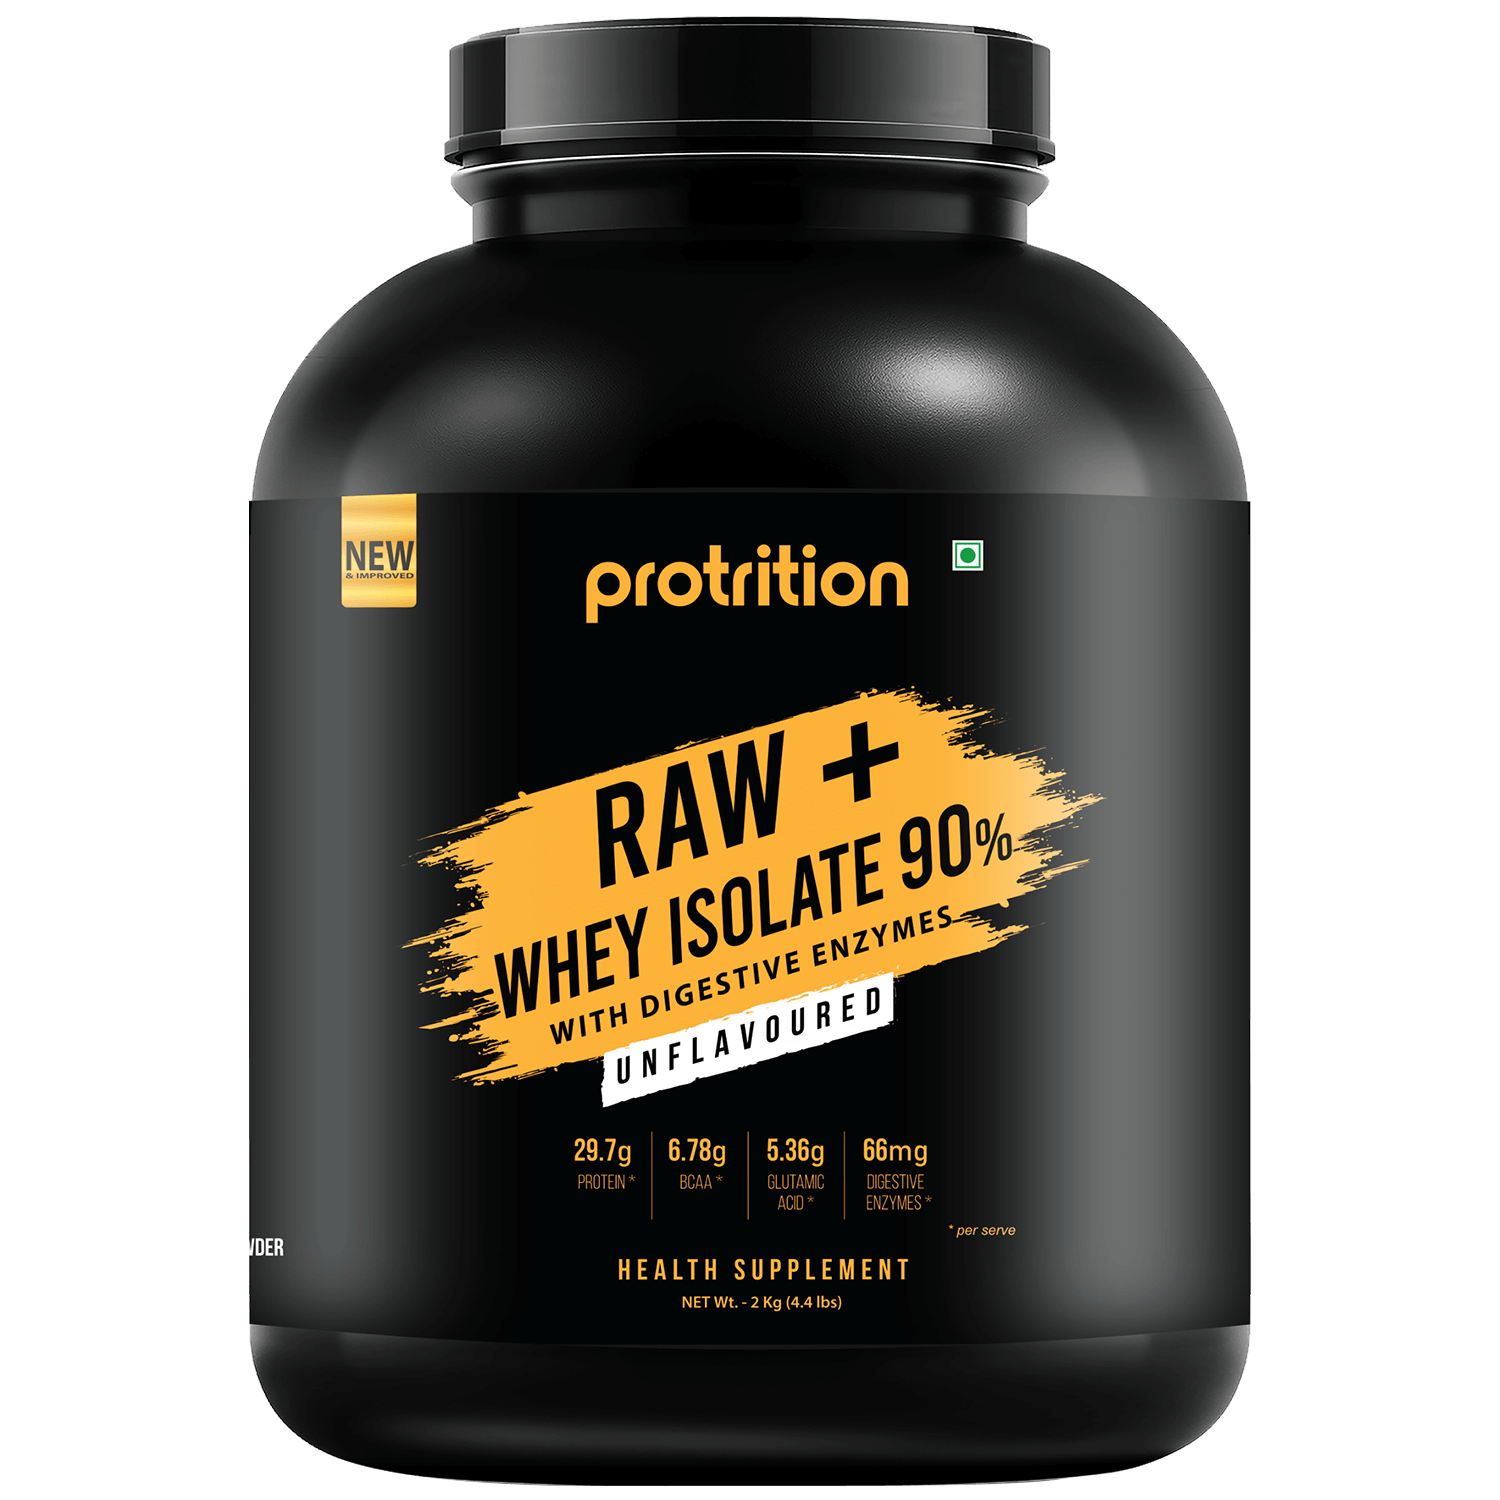 Protrition Raw+Whey Protein Isolate 90%, Unflavoured, 2Kg